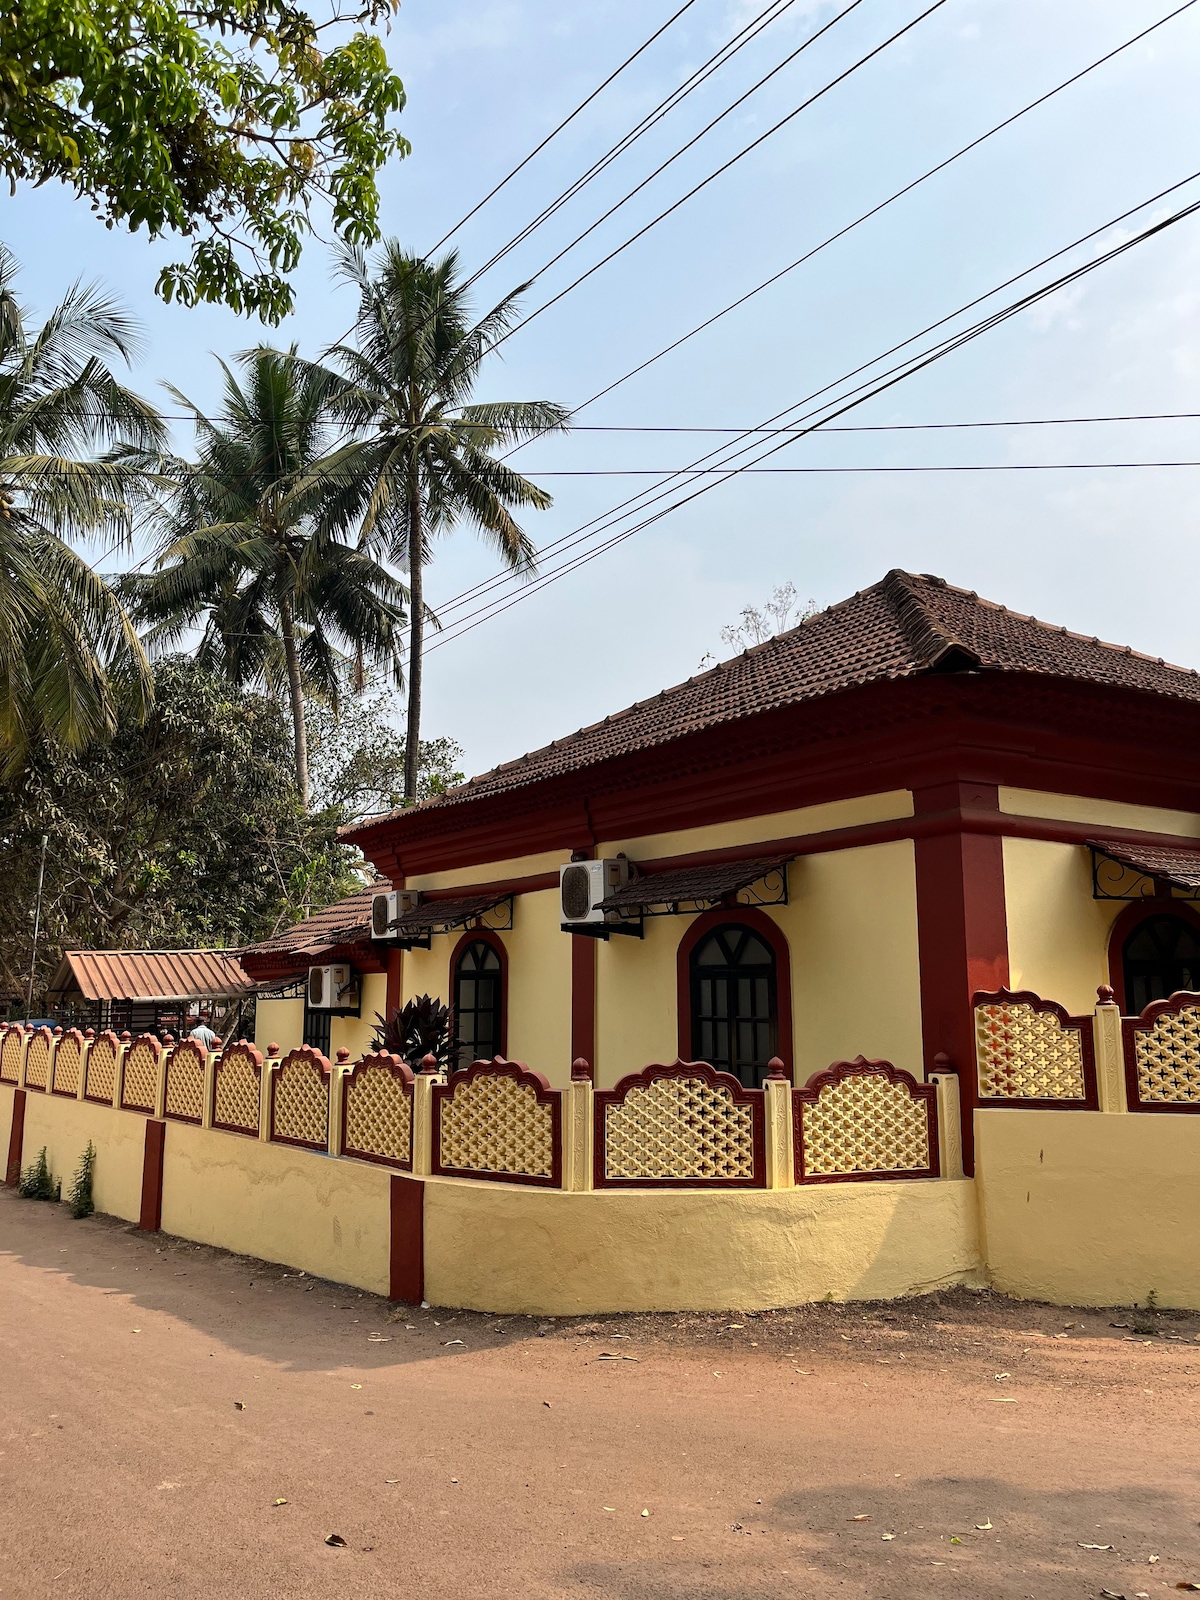 Well-maintained 120-year old Goan home in village